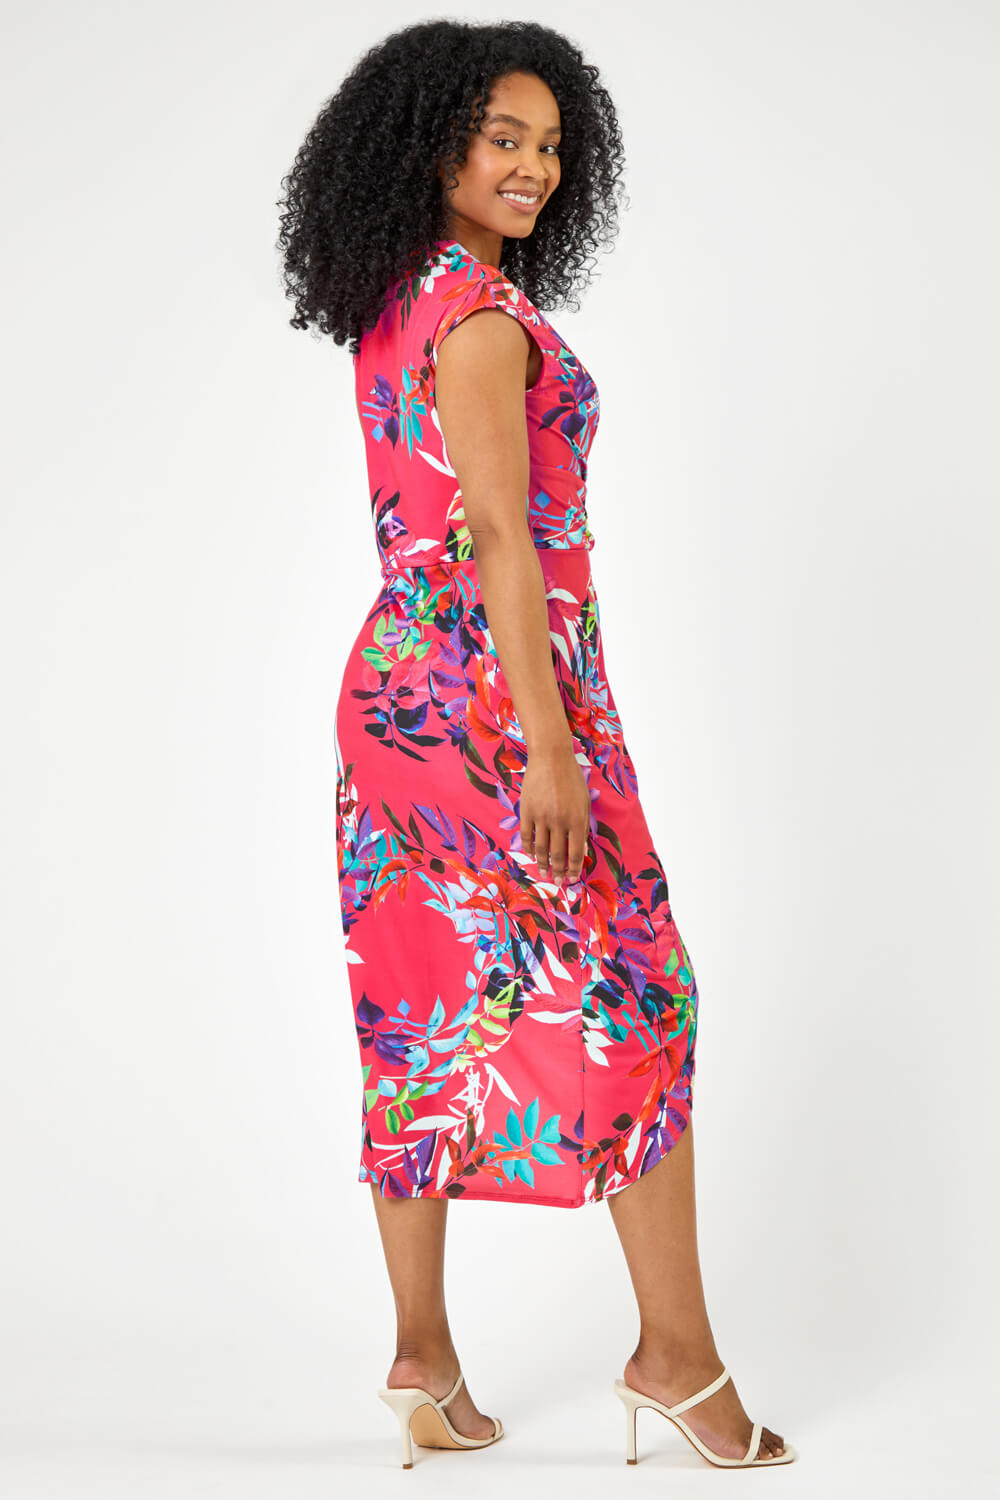 PINK Petite Tropical Print Ruched Wrap Dress, Image 2 of 5